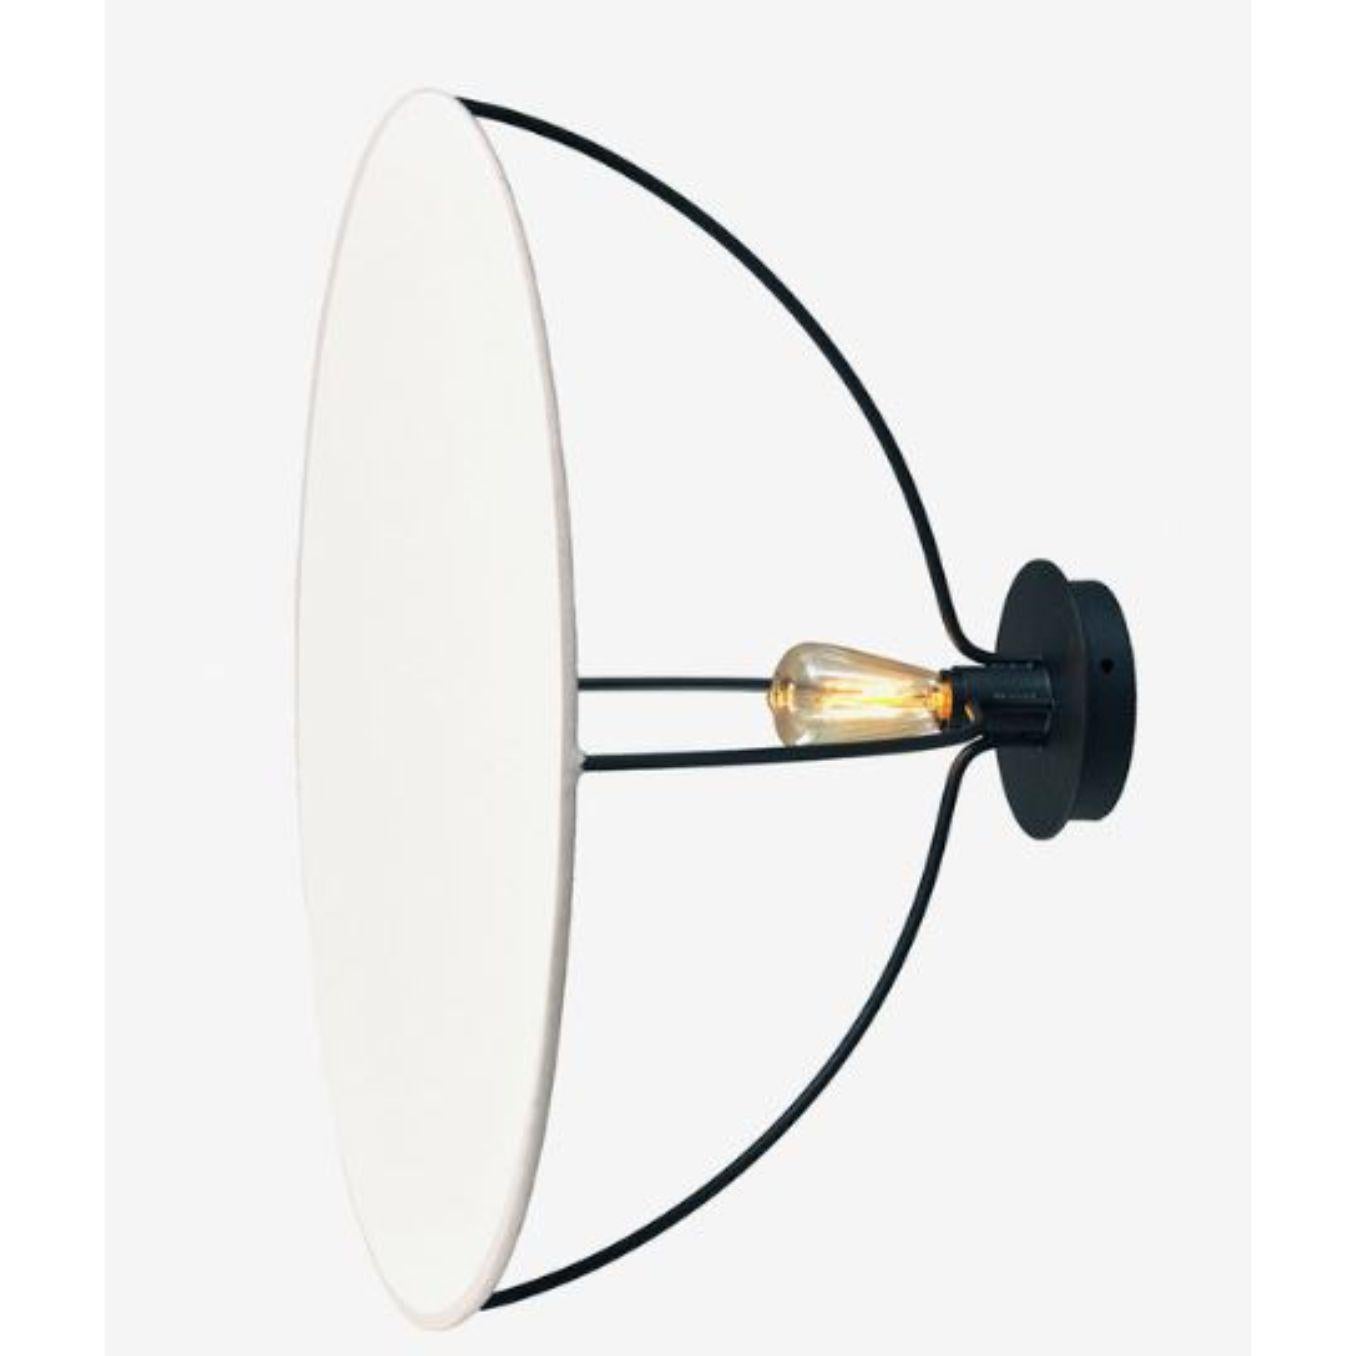 Eclipse wall light by RADAR
Design: Bastien Taillard
Materials: Metal, cotton.
Dimensions: W 50 x D 25 x H 50 cm

All our lamps can be wired according to each country. If sold to the USA it will be wired for the USA for instance.

Elegant,